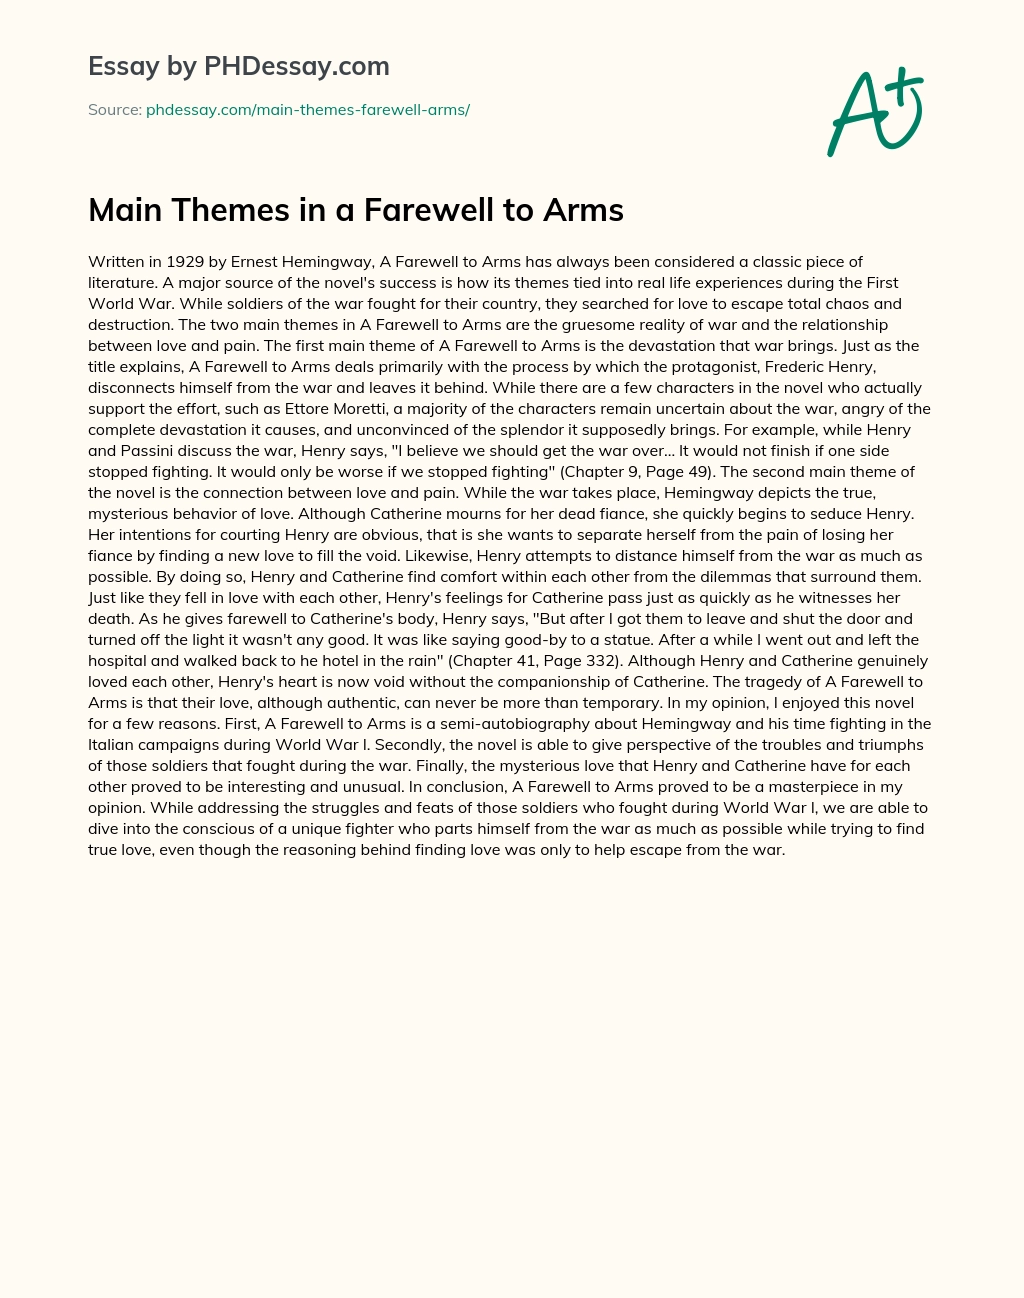 Main Themes in a Farewell to Arms essay